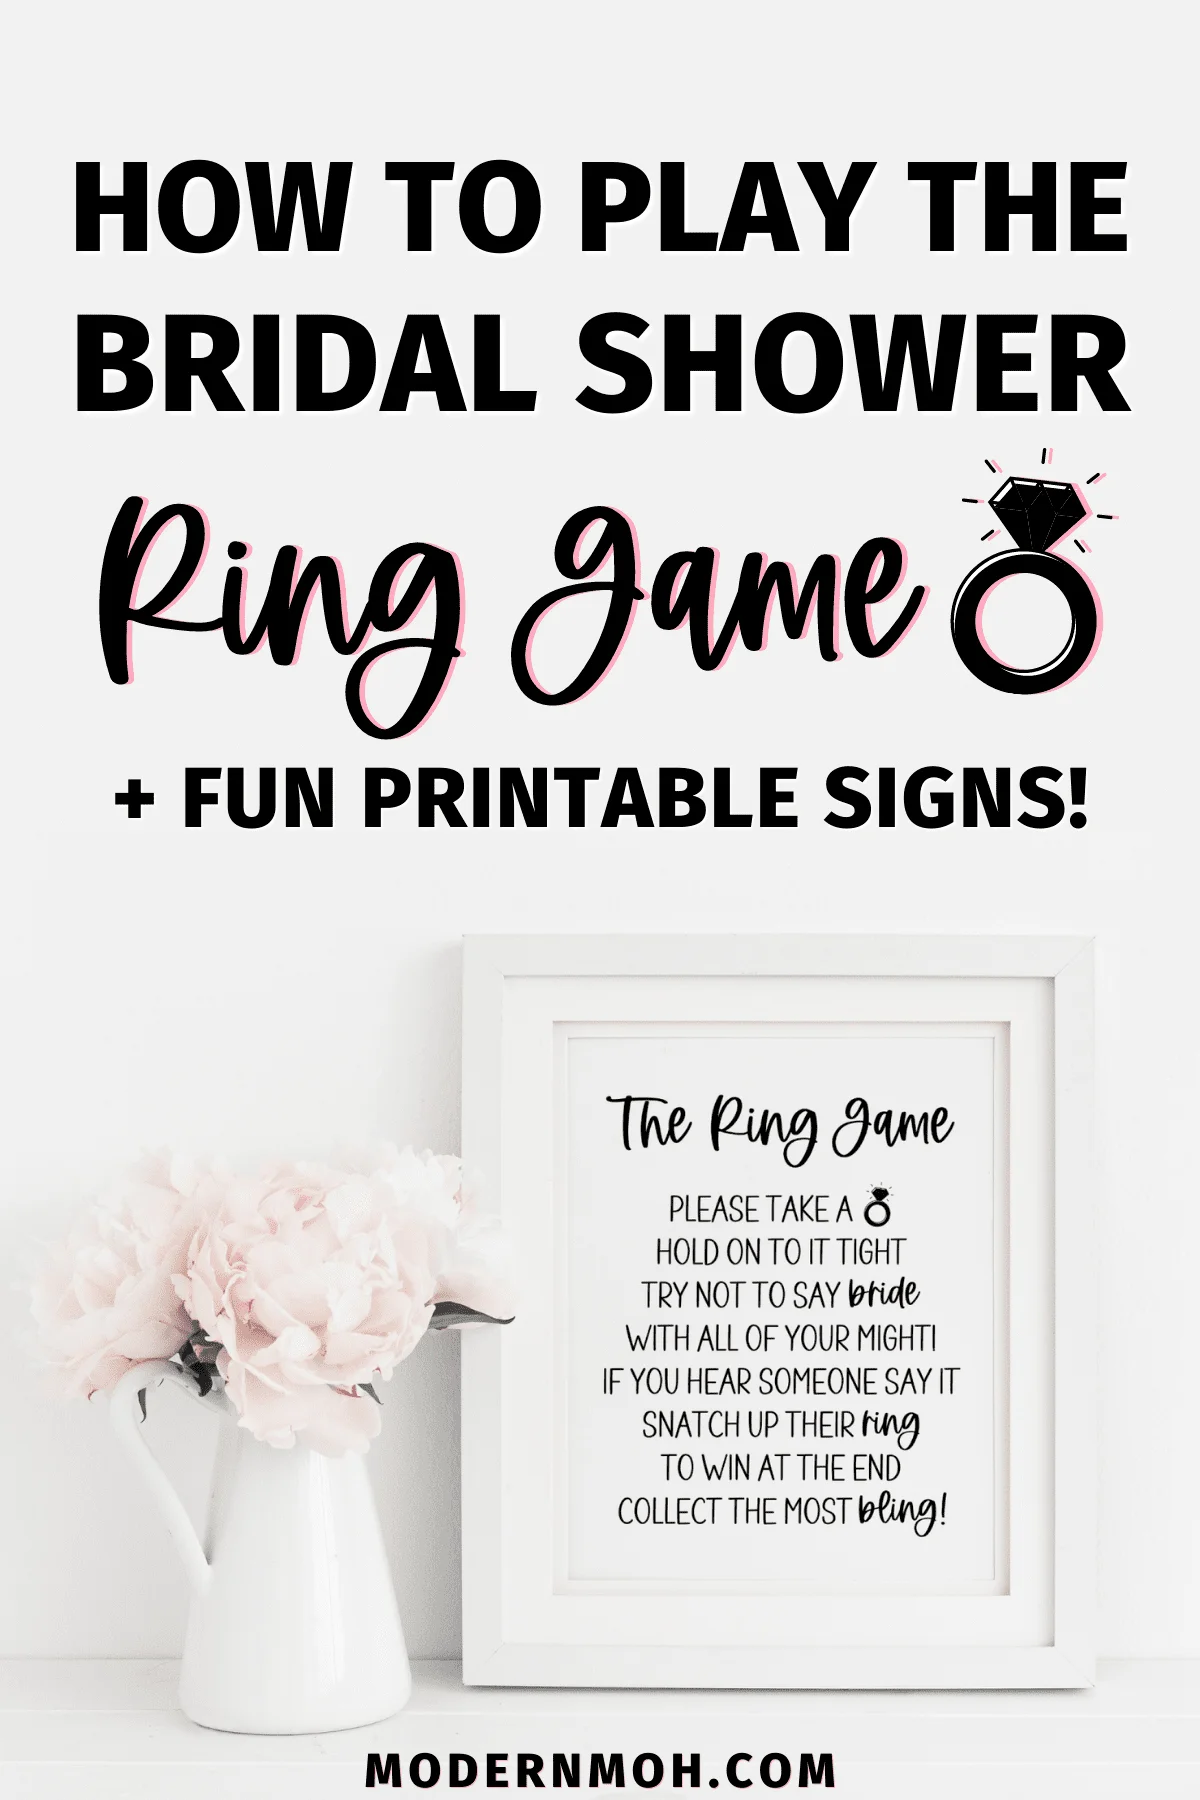 Bridal Shower Ring Game: How to Play + Printable Signs